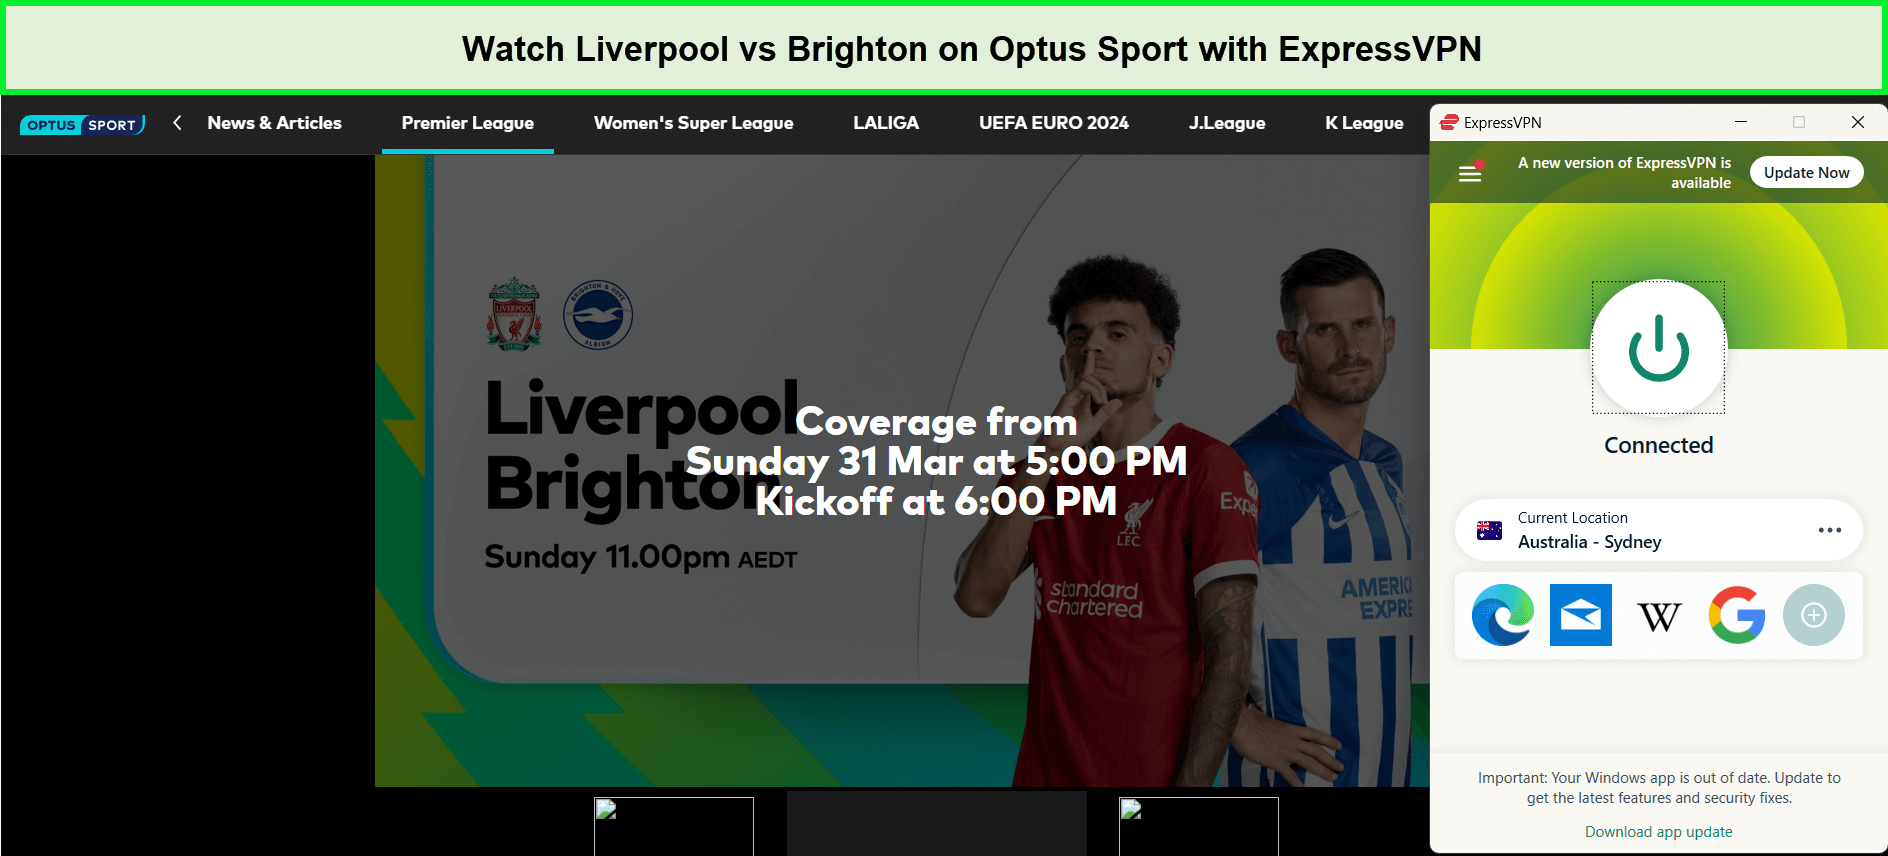 watch-Liverpool-vs-Brighton-in-Spain-on-Optus-Sport-with-expressvpn